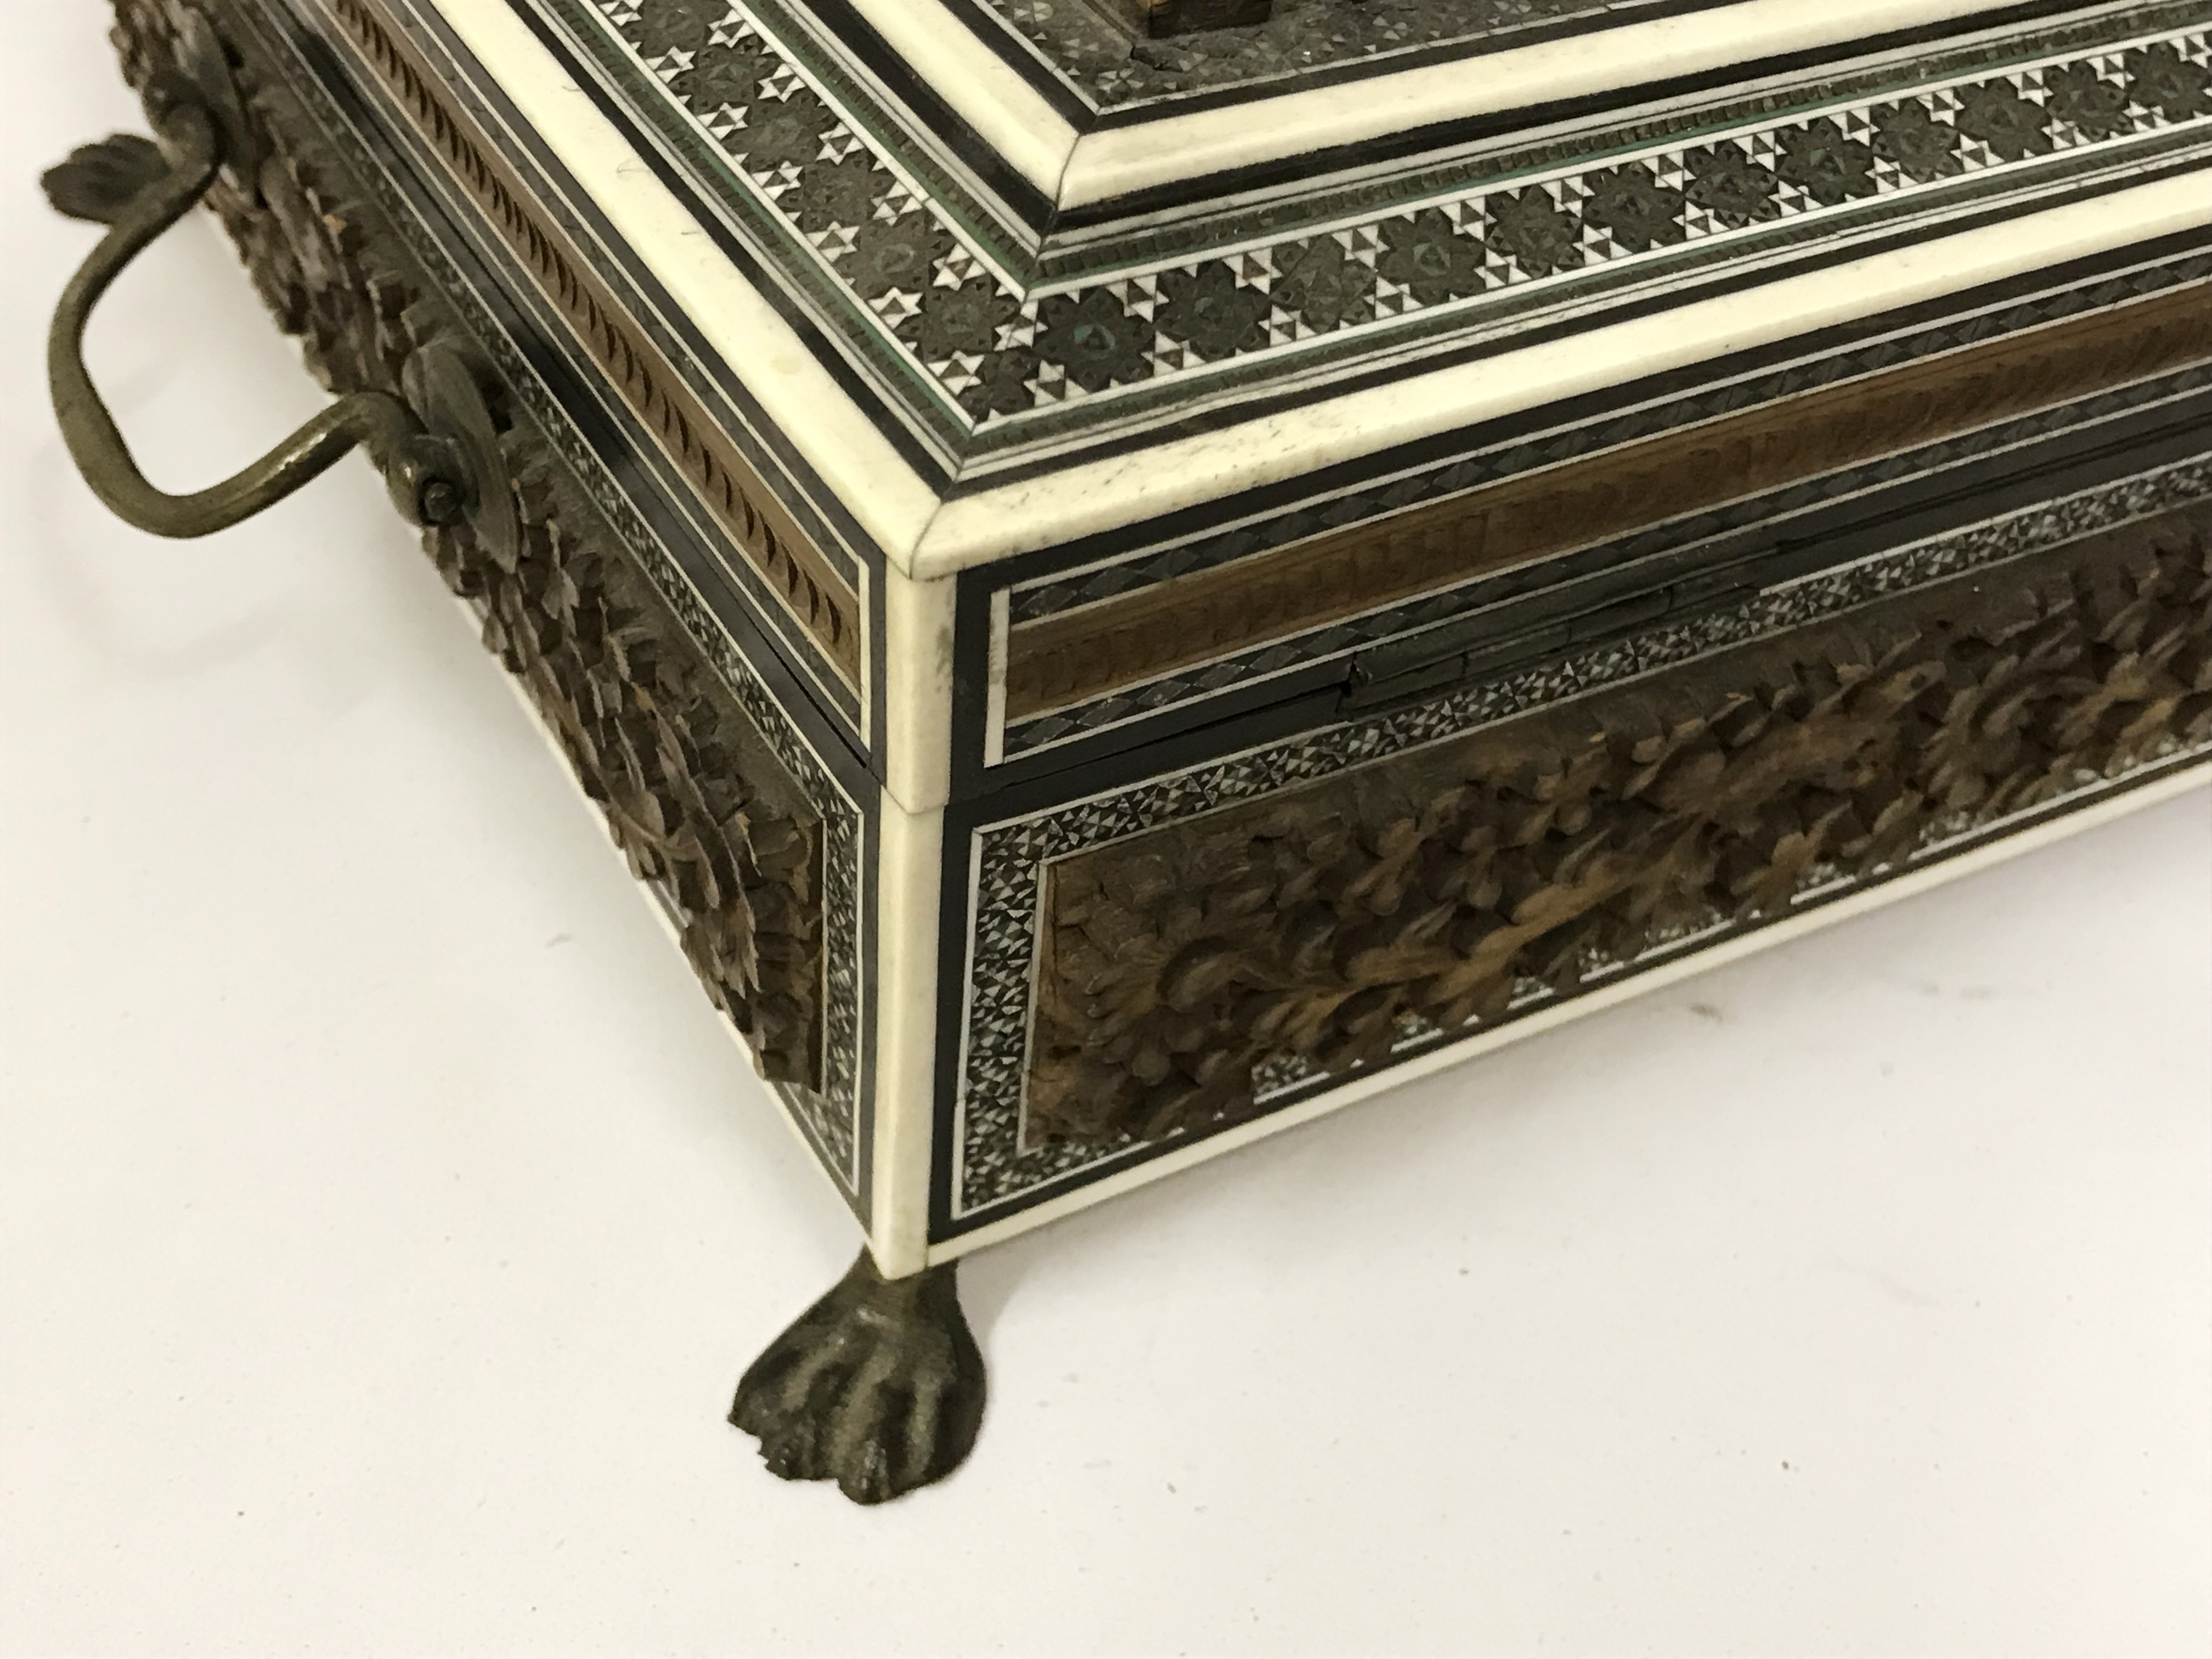 BEAUTIFUL ANGLO INDIAN SEWING BOX WITH CONTENT - Image 12 of 18